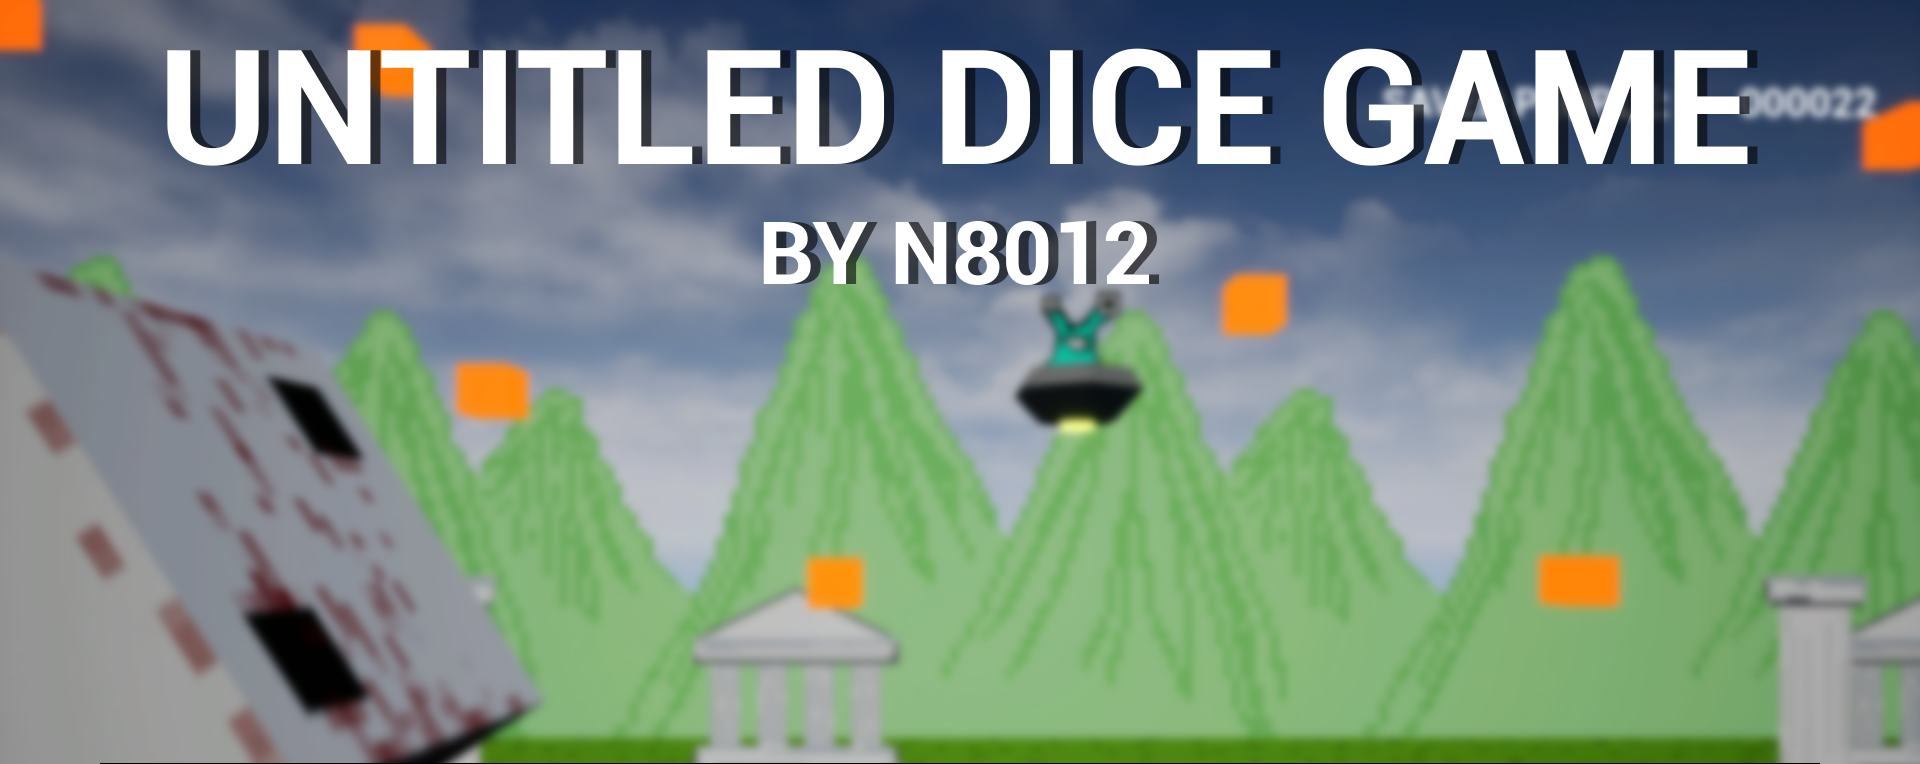 UNTITLED DICE GAME